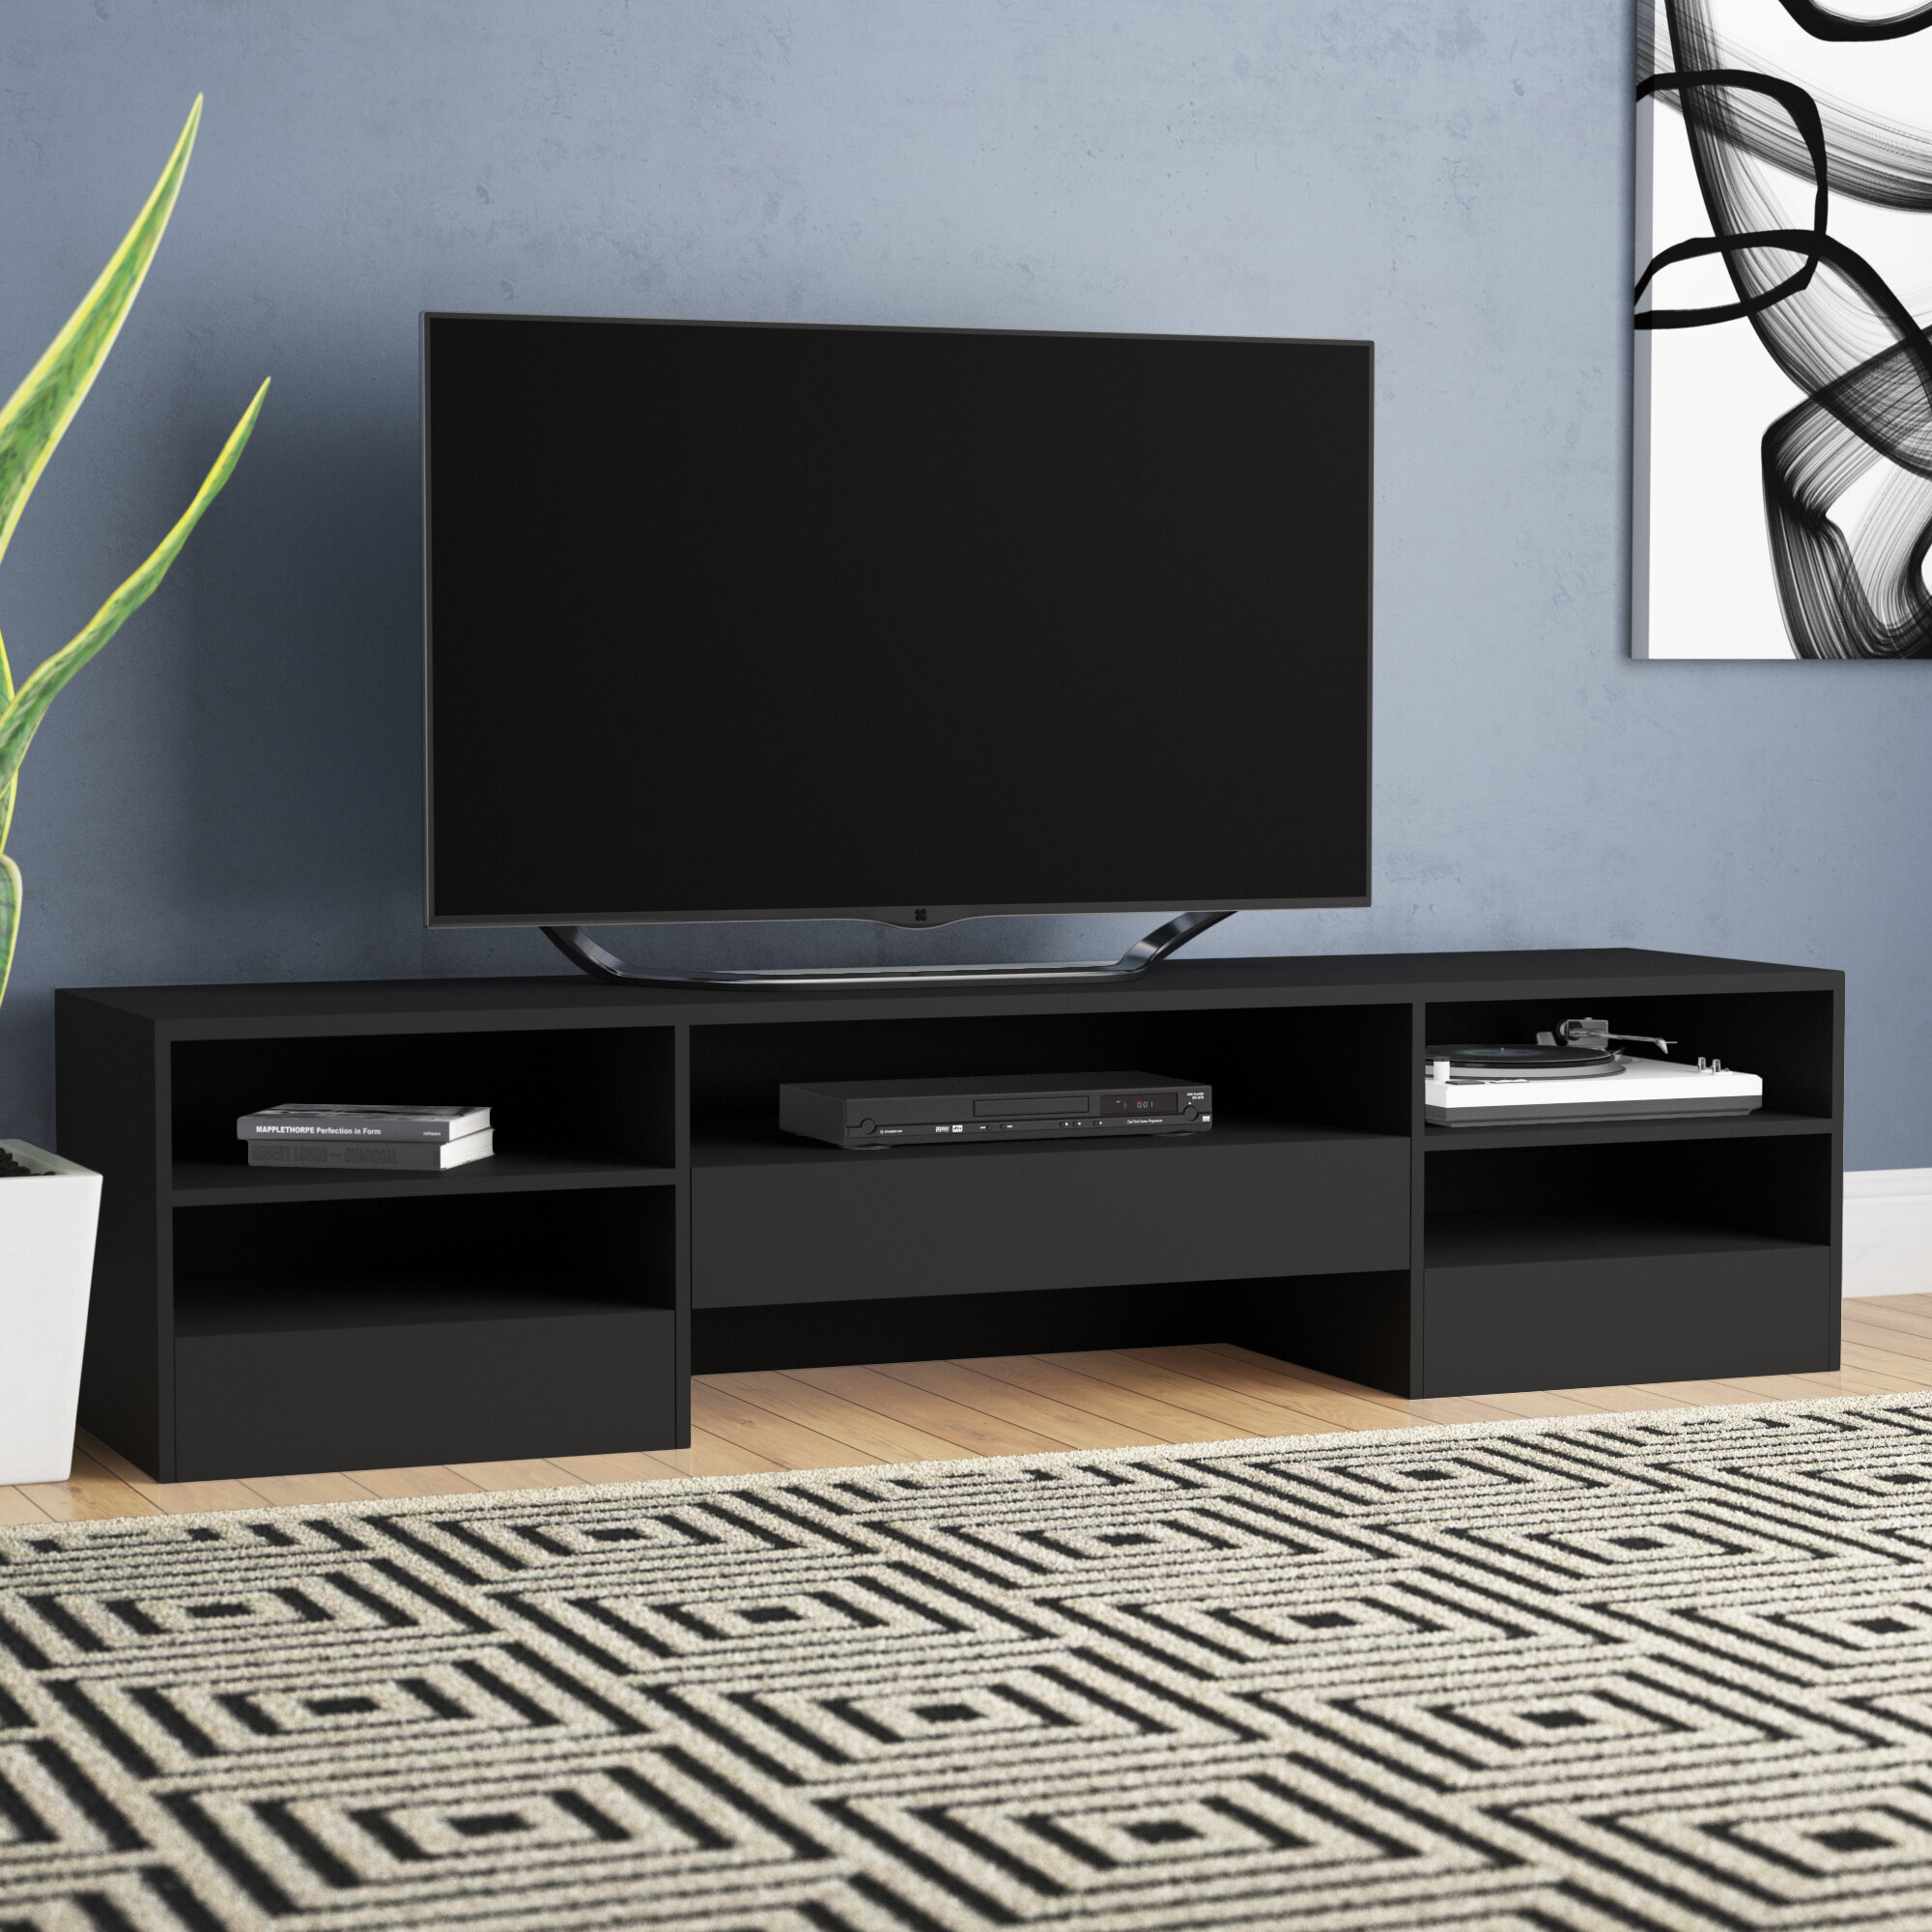 Ebern Designs Persephone Tv Stand For Tvs Up To 75 Reviews Wayfair